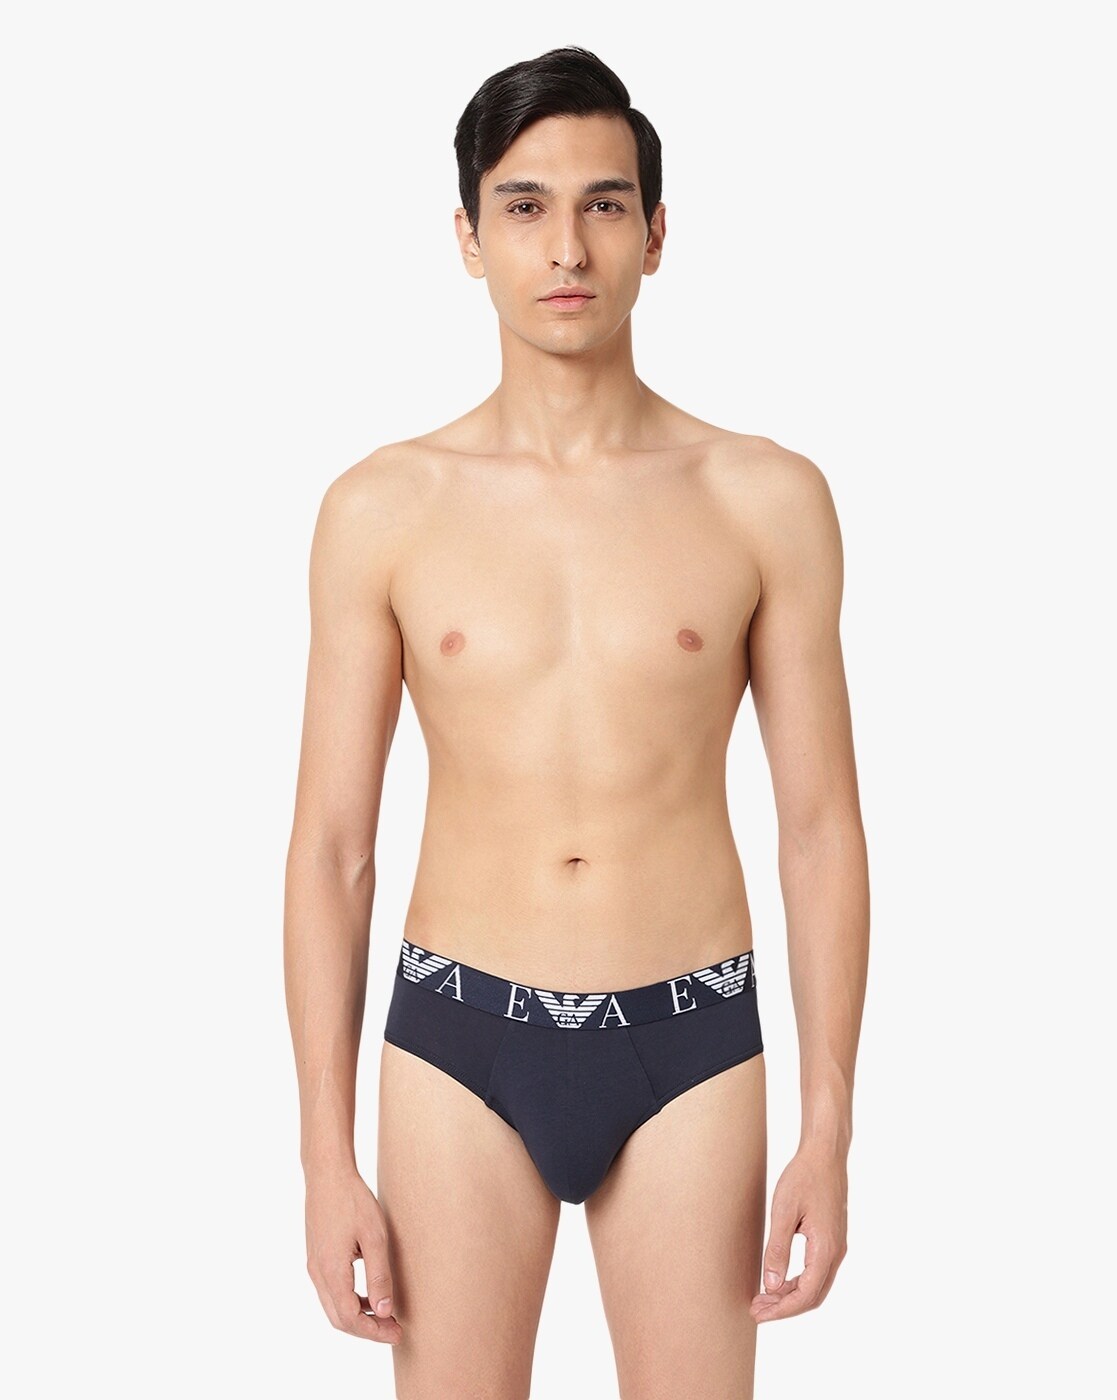 American Eagle Men's Underwear 3-Packs JUST $7.99 (Regularly $30) – Only  $2.66 Each!